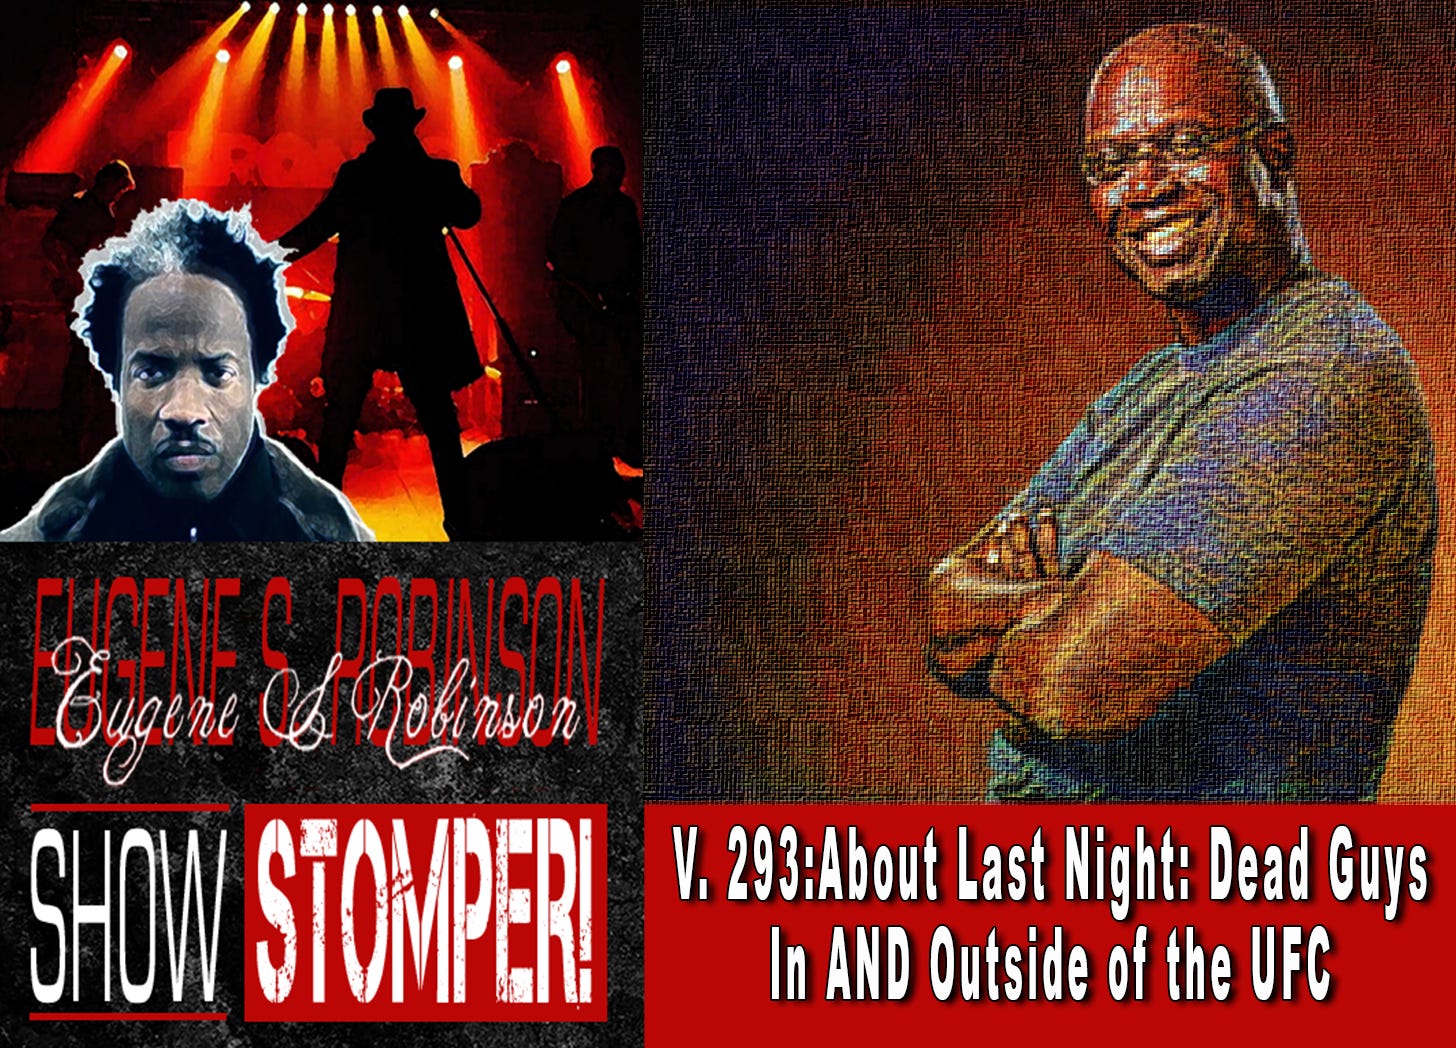 V. 293:About Last Night: Dead Guys In AND Outside of the UFC On The Eugene S. Robinson Show Stomper!